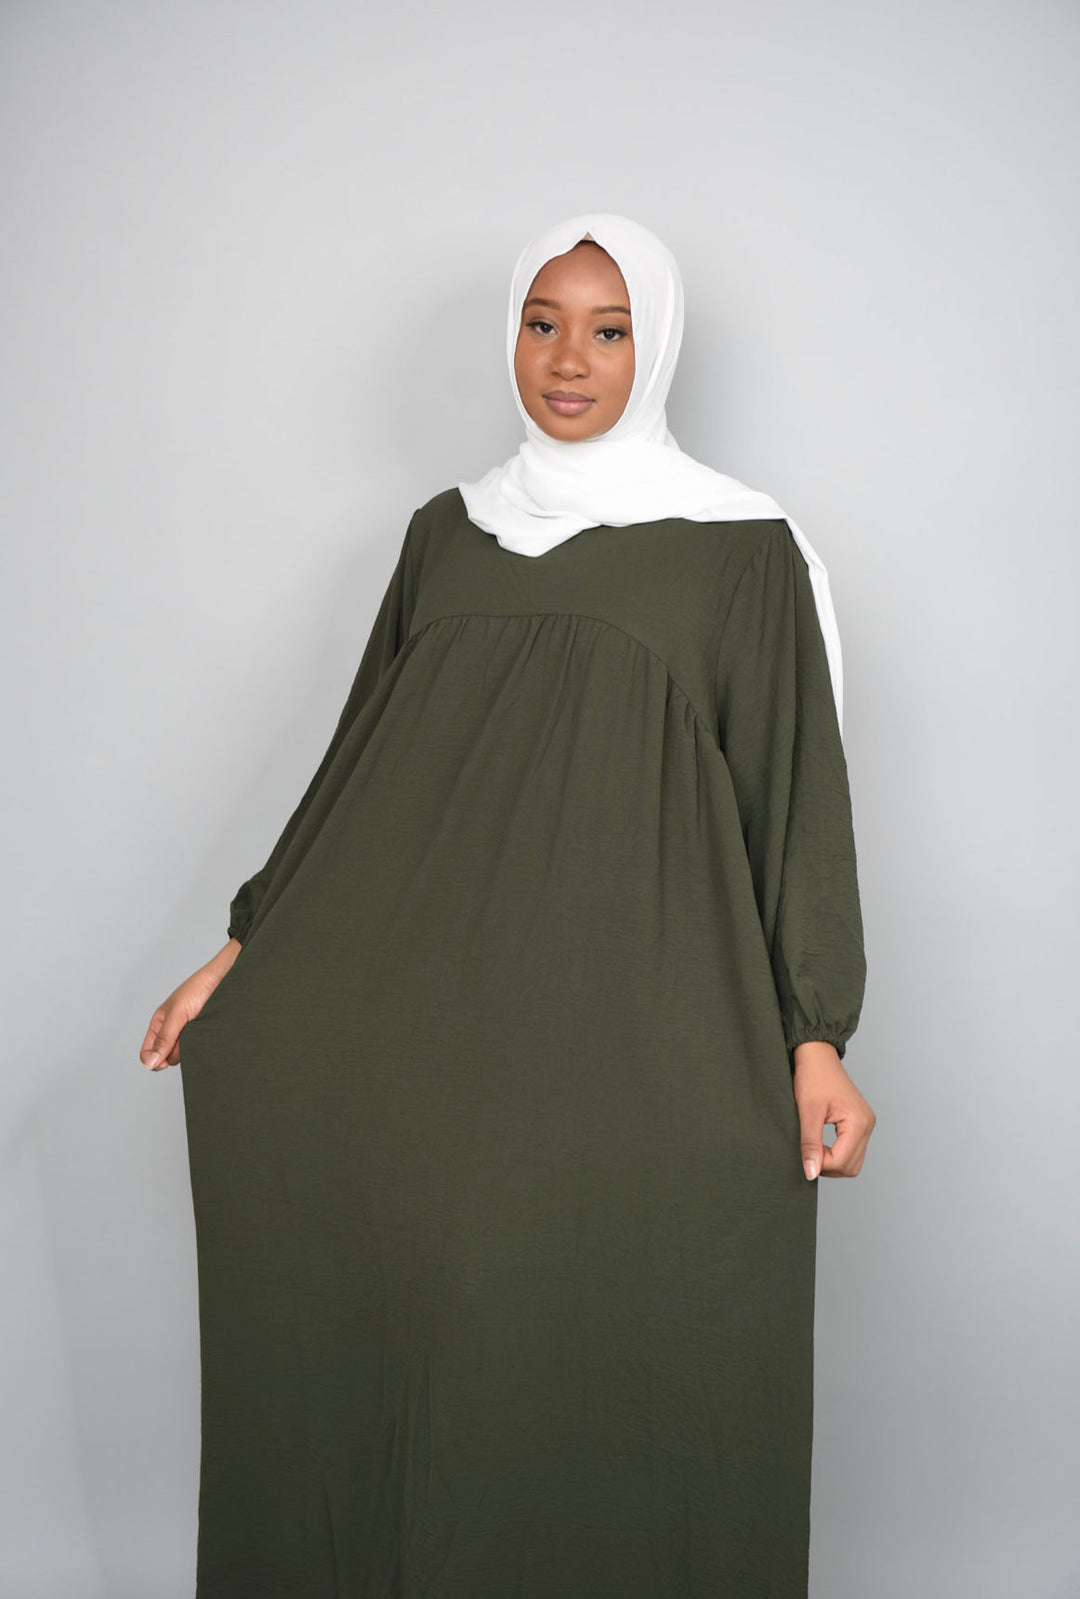 Get trendy with Amelia Textured Abaya - Olive -  available at Voilee NY. Grab yours for $54.90 today!